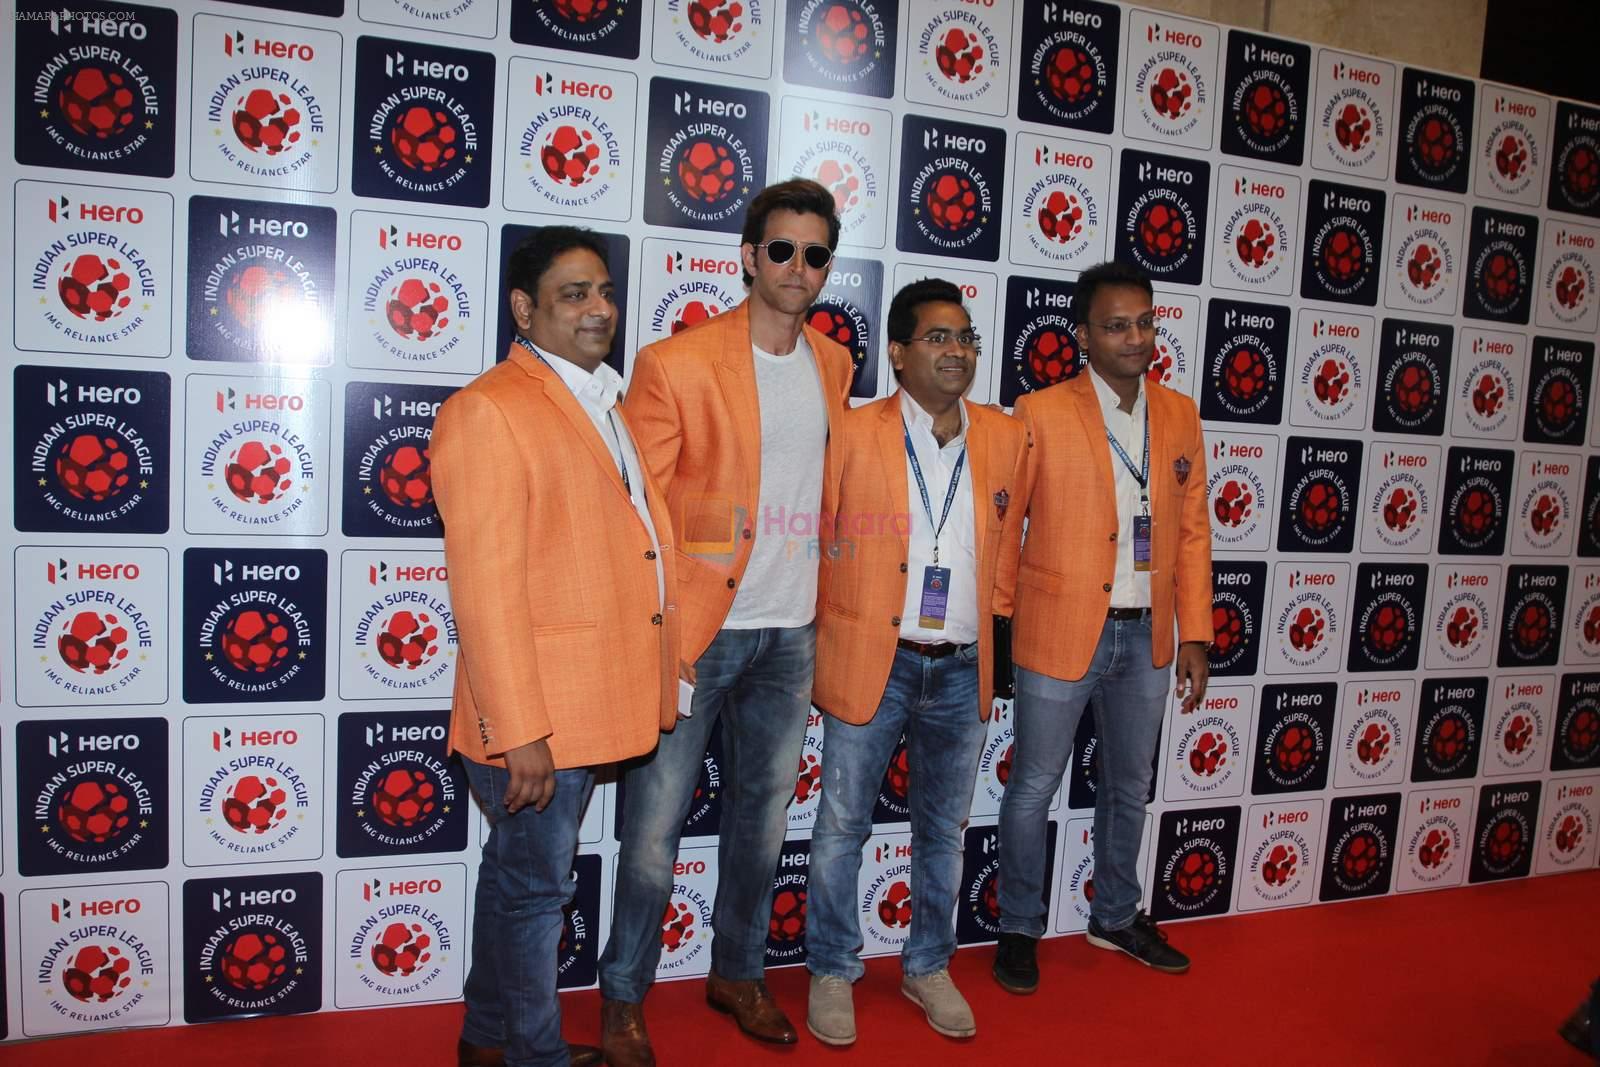 Hrithik Roshan snapped at Indian Super League auctions on 10th July 2015